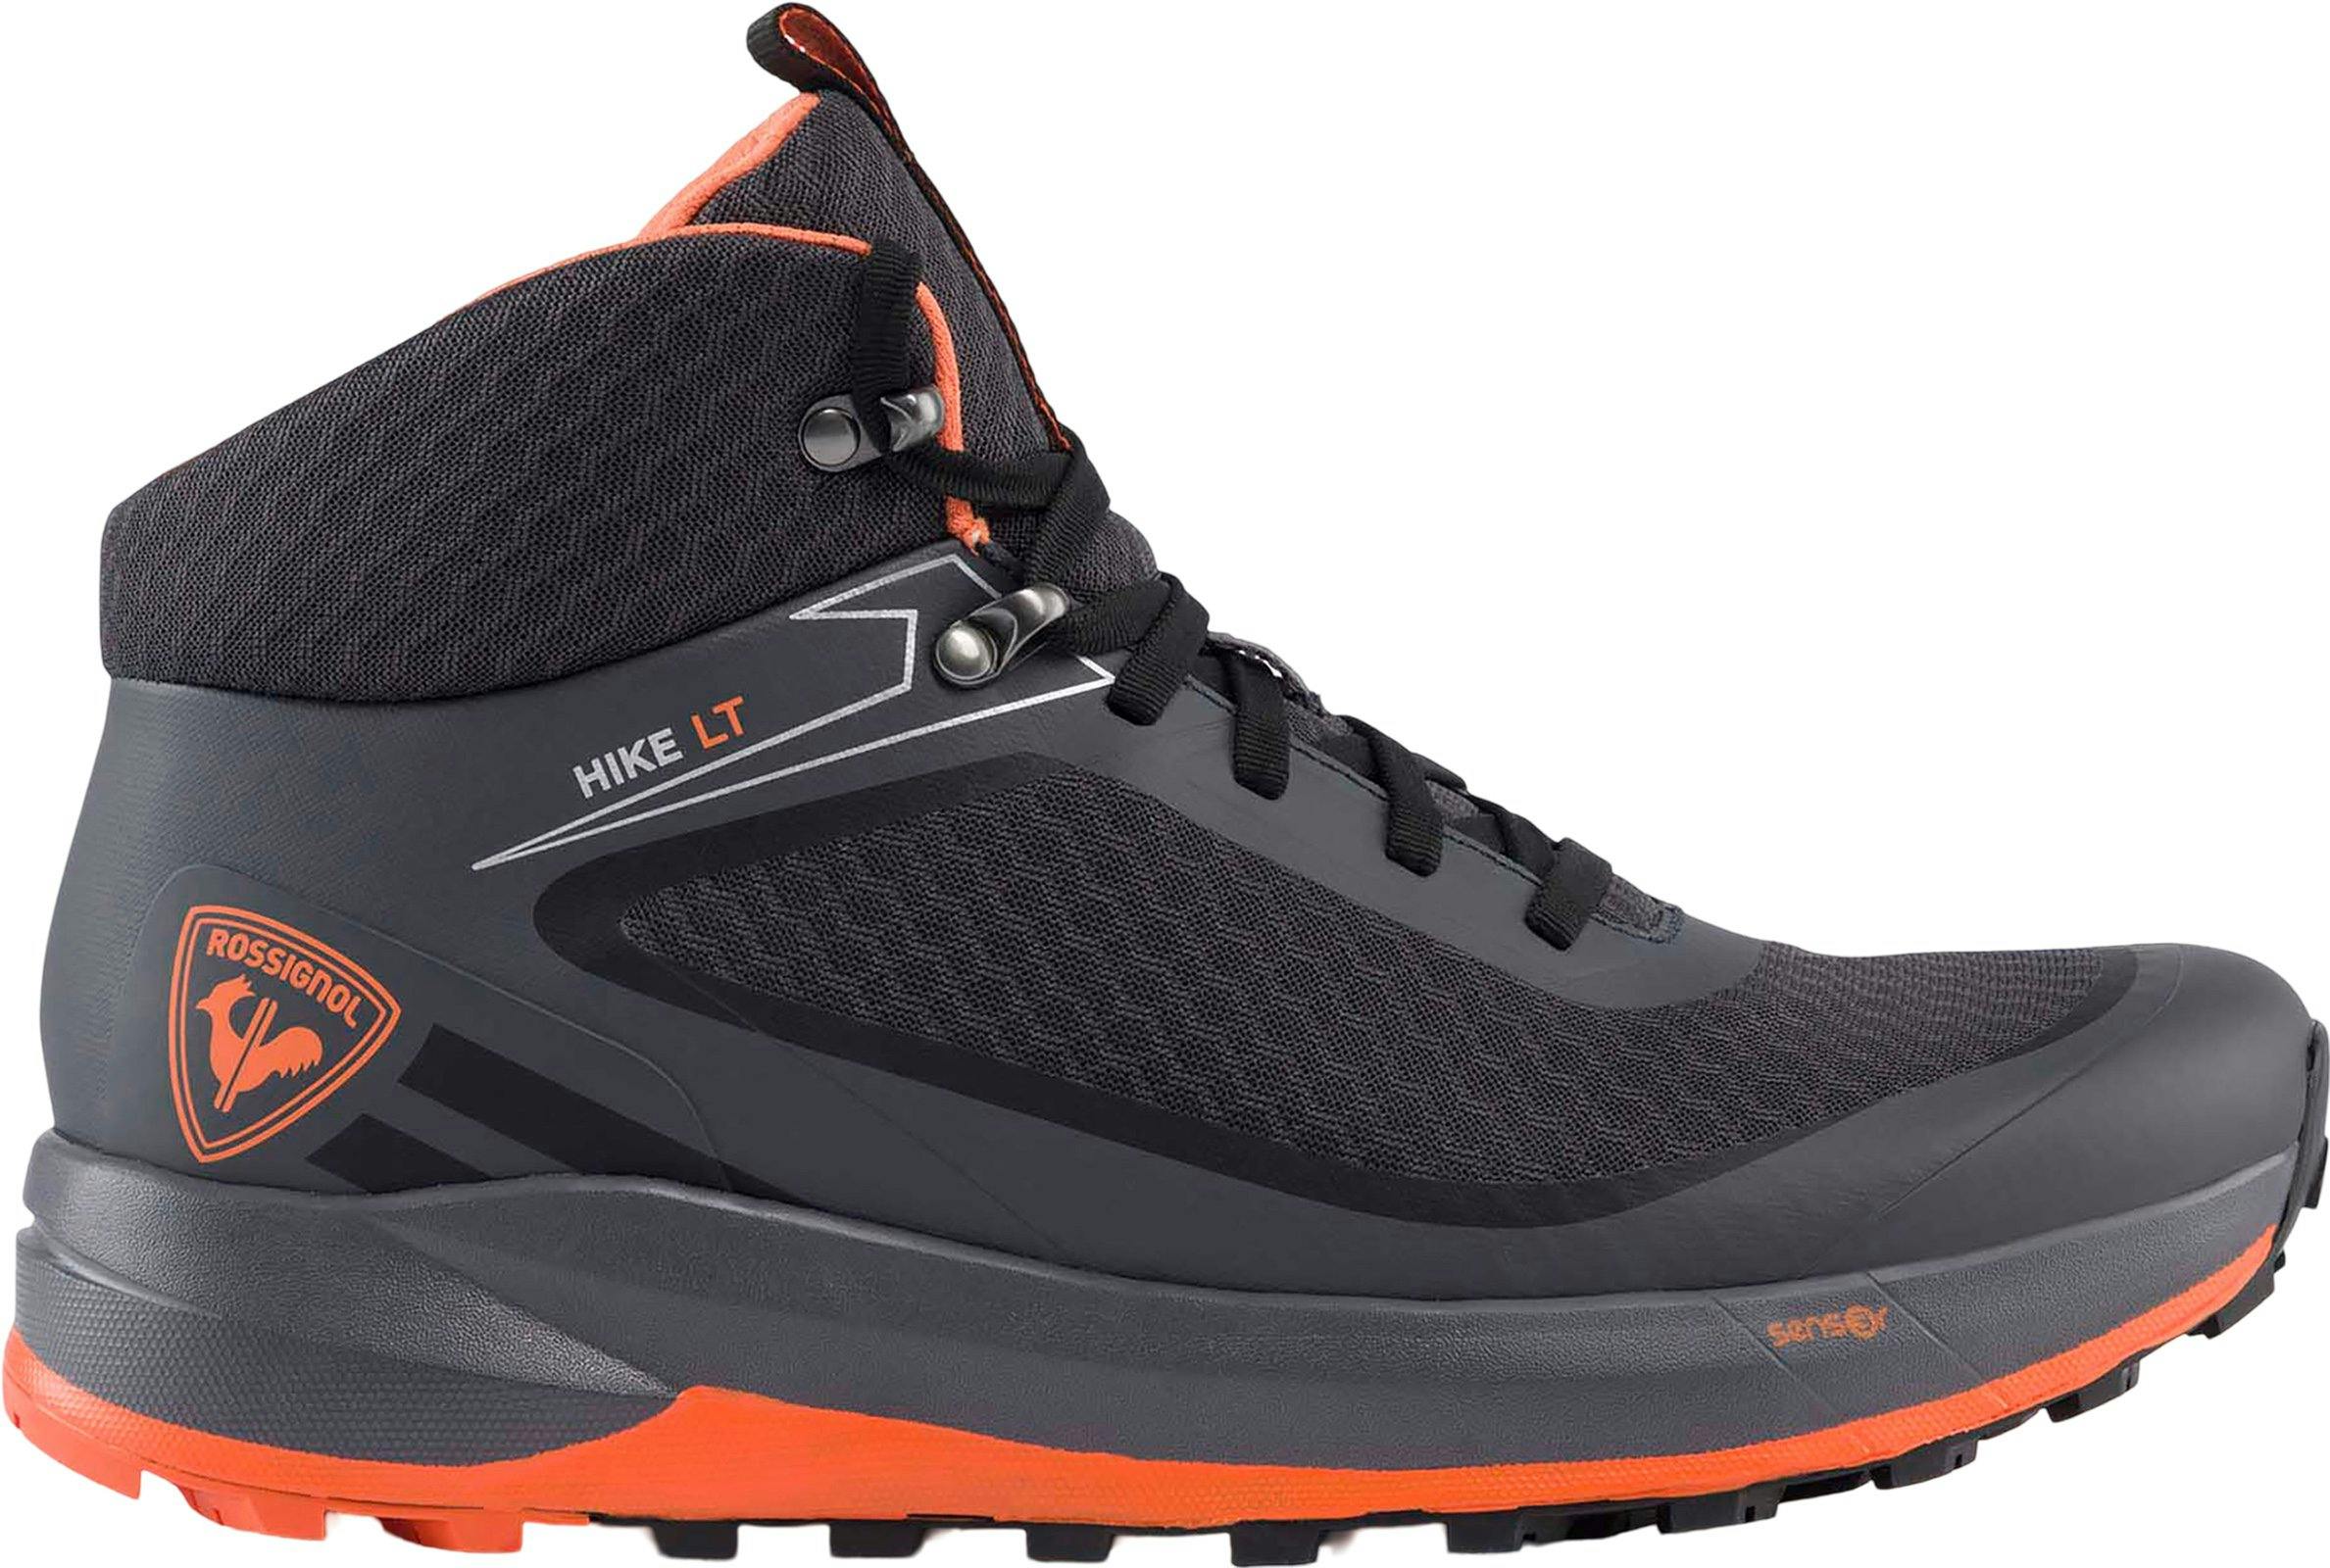 Product image for Skpr Hike Lightweight Hiking Boot - Men's